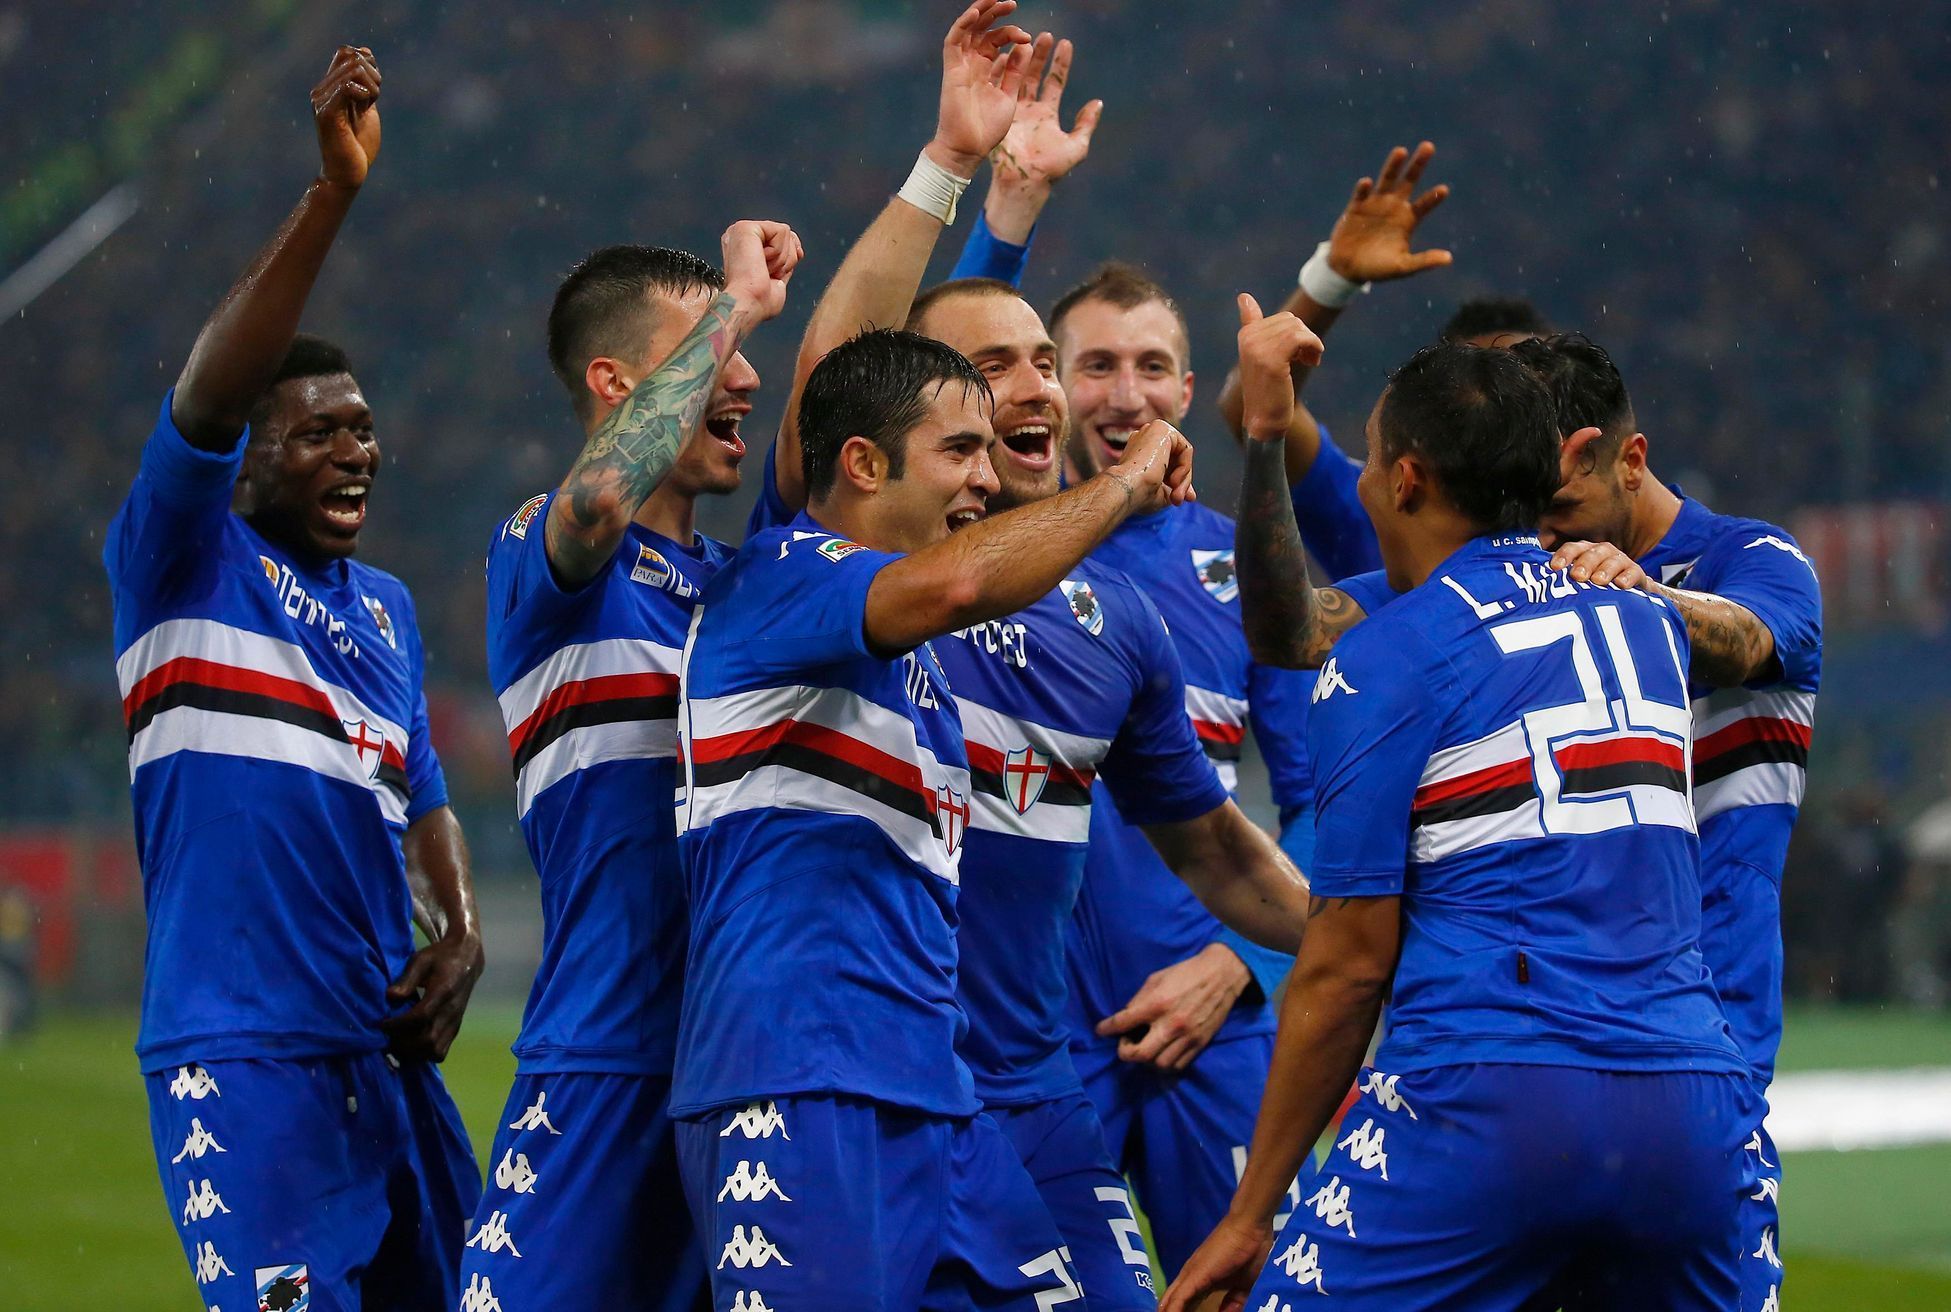 Sampdoria's Muriel celebrates with his team mates after scoring against AS Roma in their Italian Serie A soccer match at the Olympic stadium in Rome